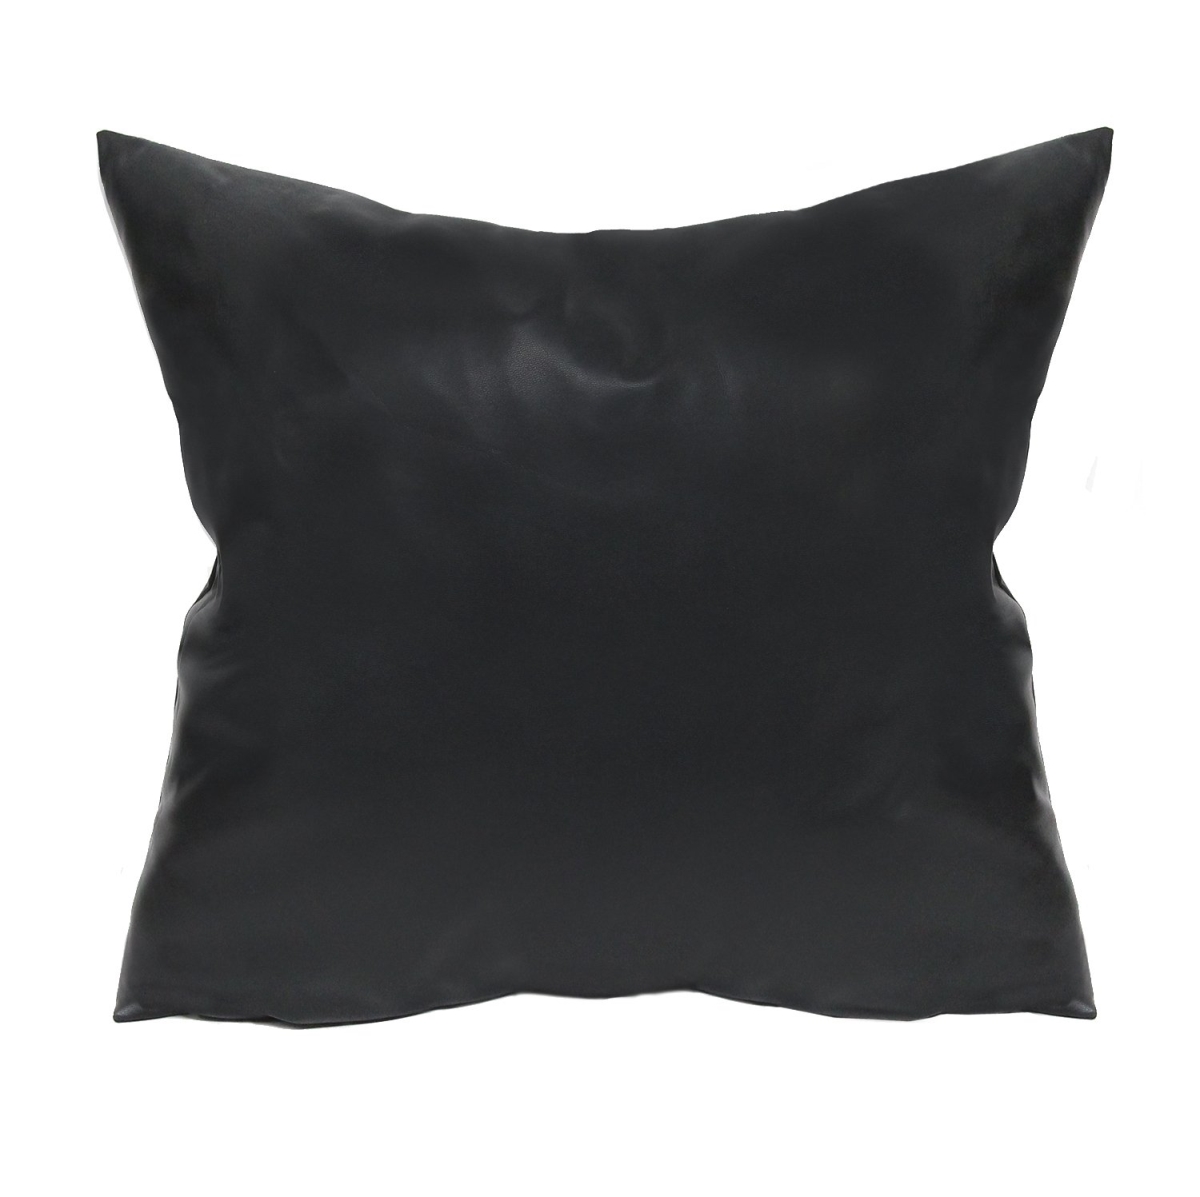 Home Roots Beddings 331472 Faux Leather Pillow, Black